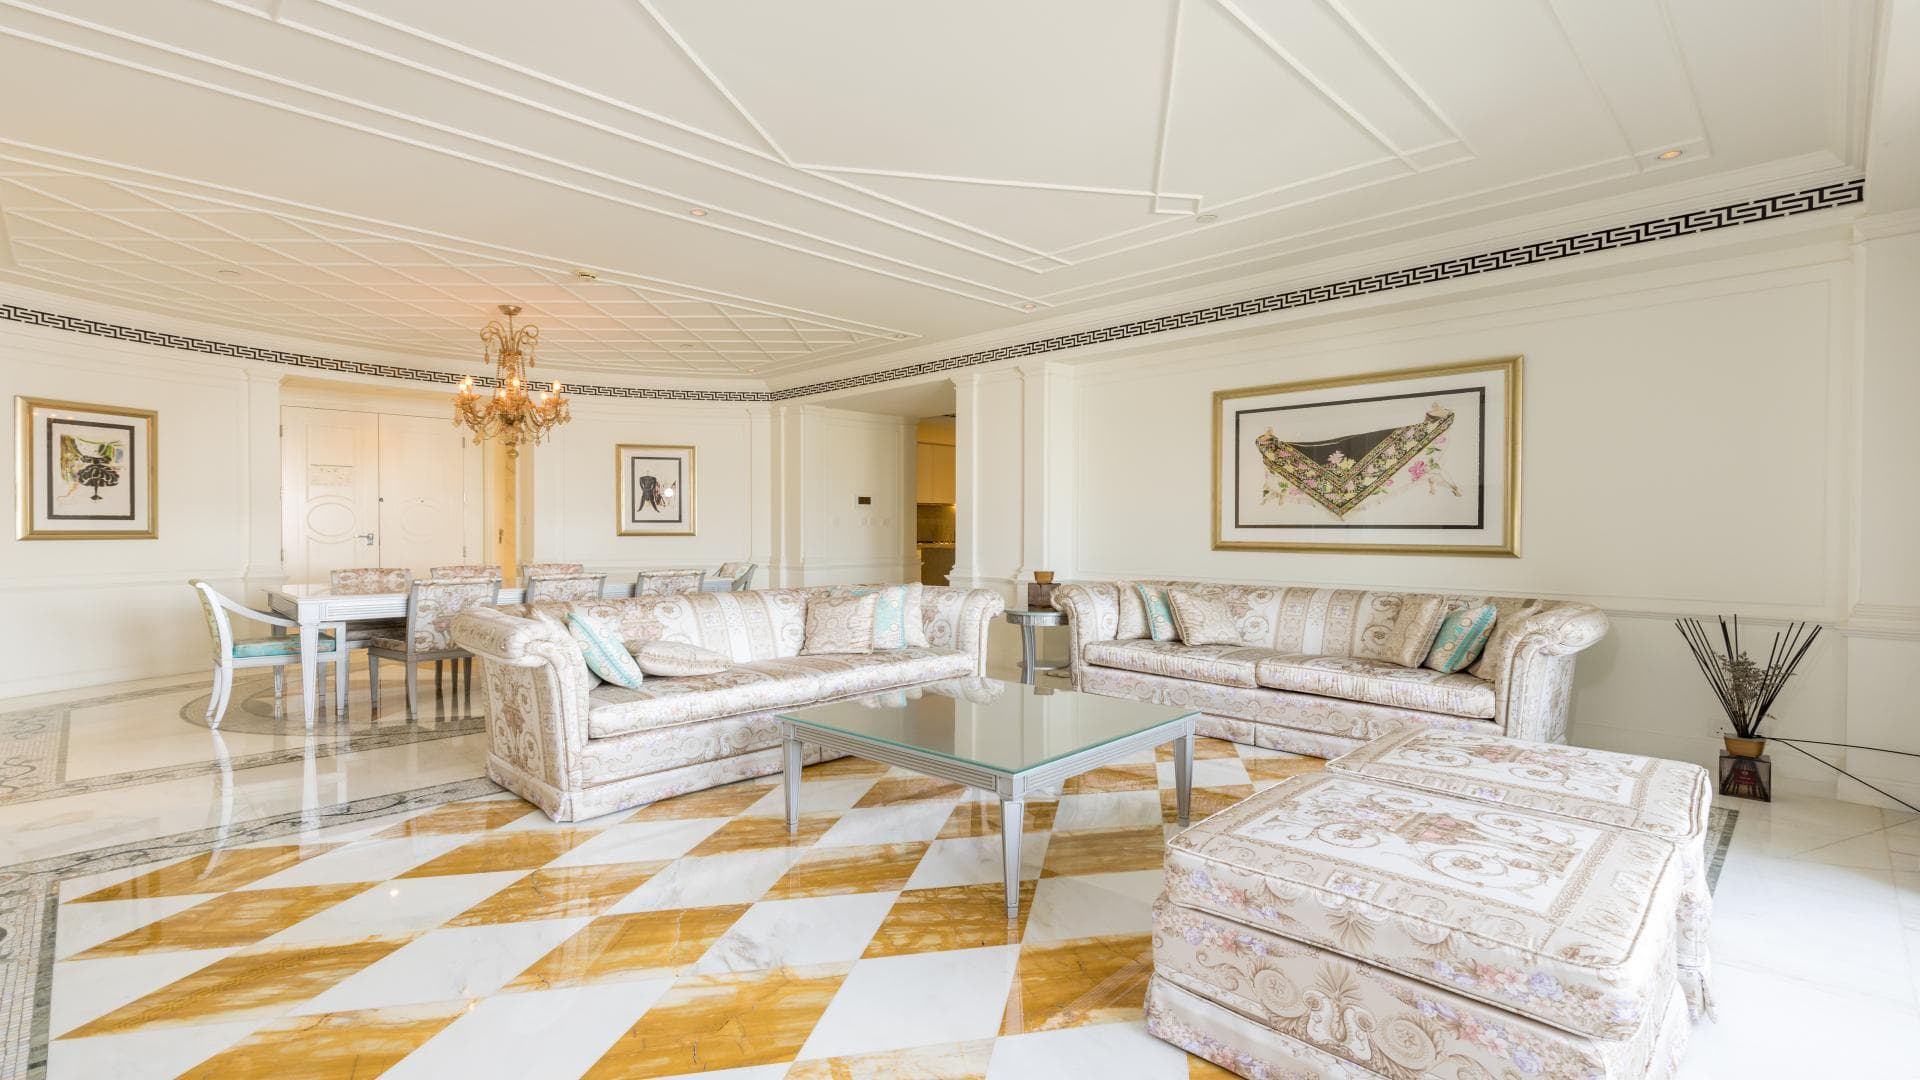 4 Bedroom Penthouse For Rent Palazzo Versace Lp14406 1021a0b2e1eceb00.jpg